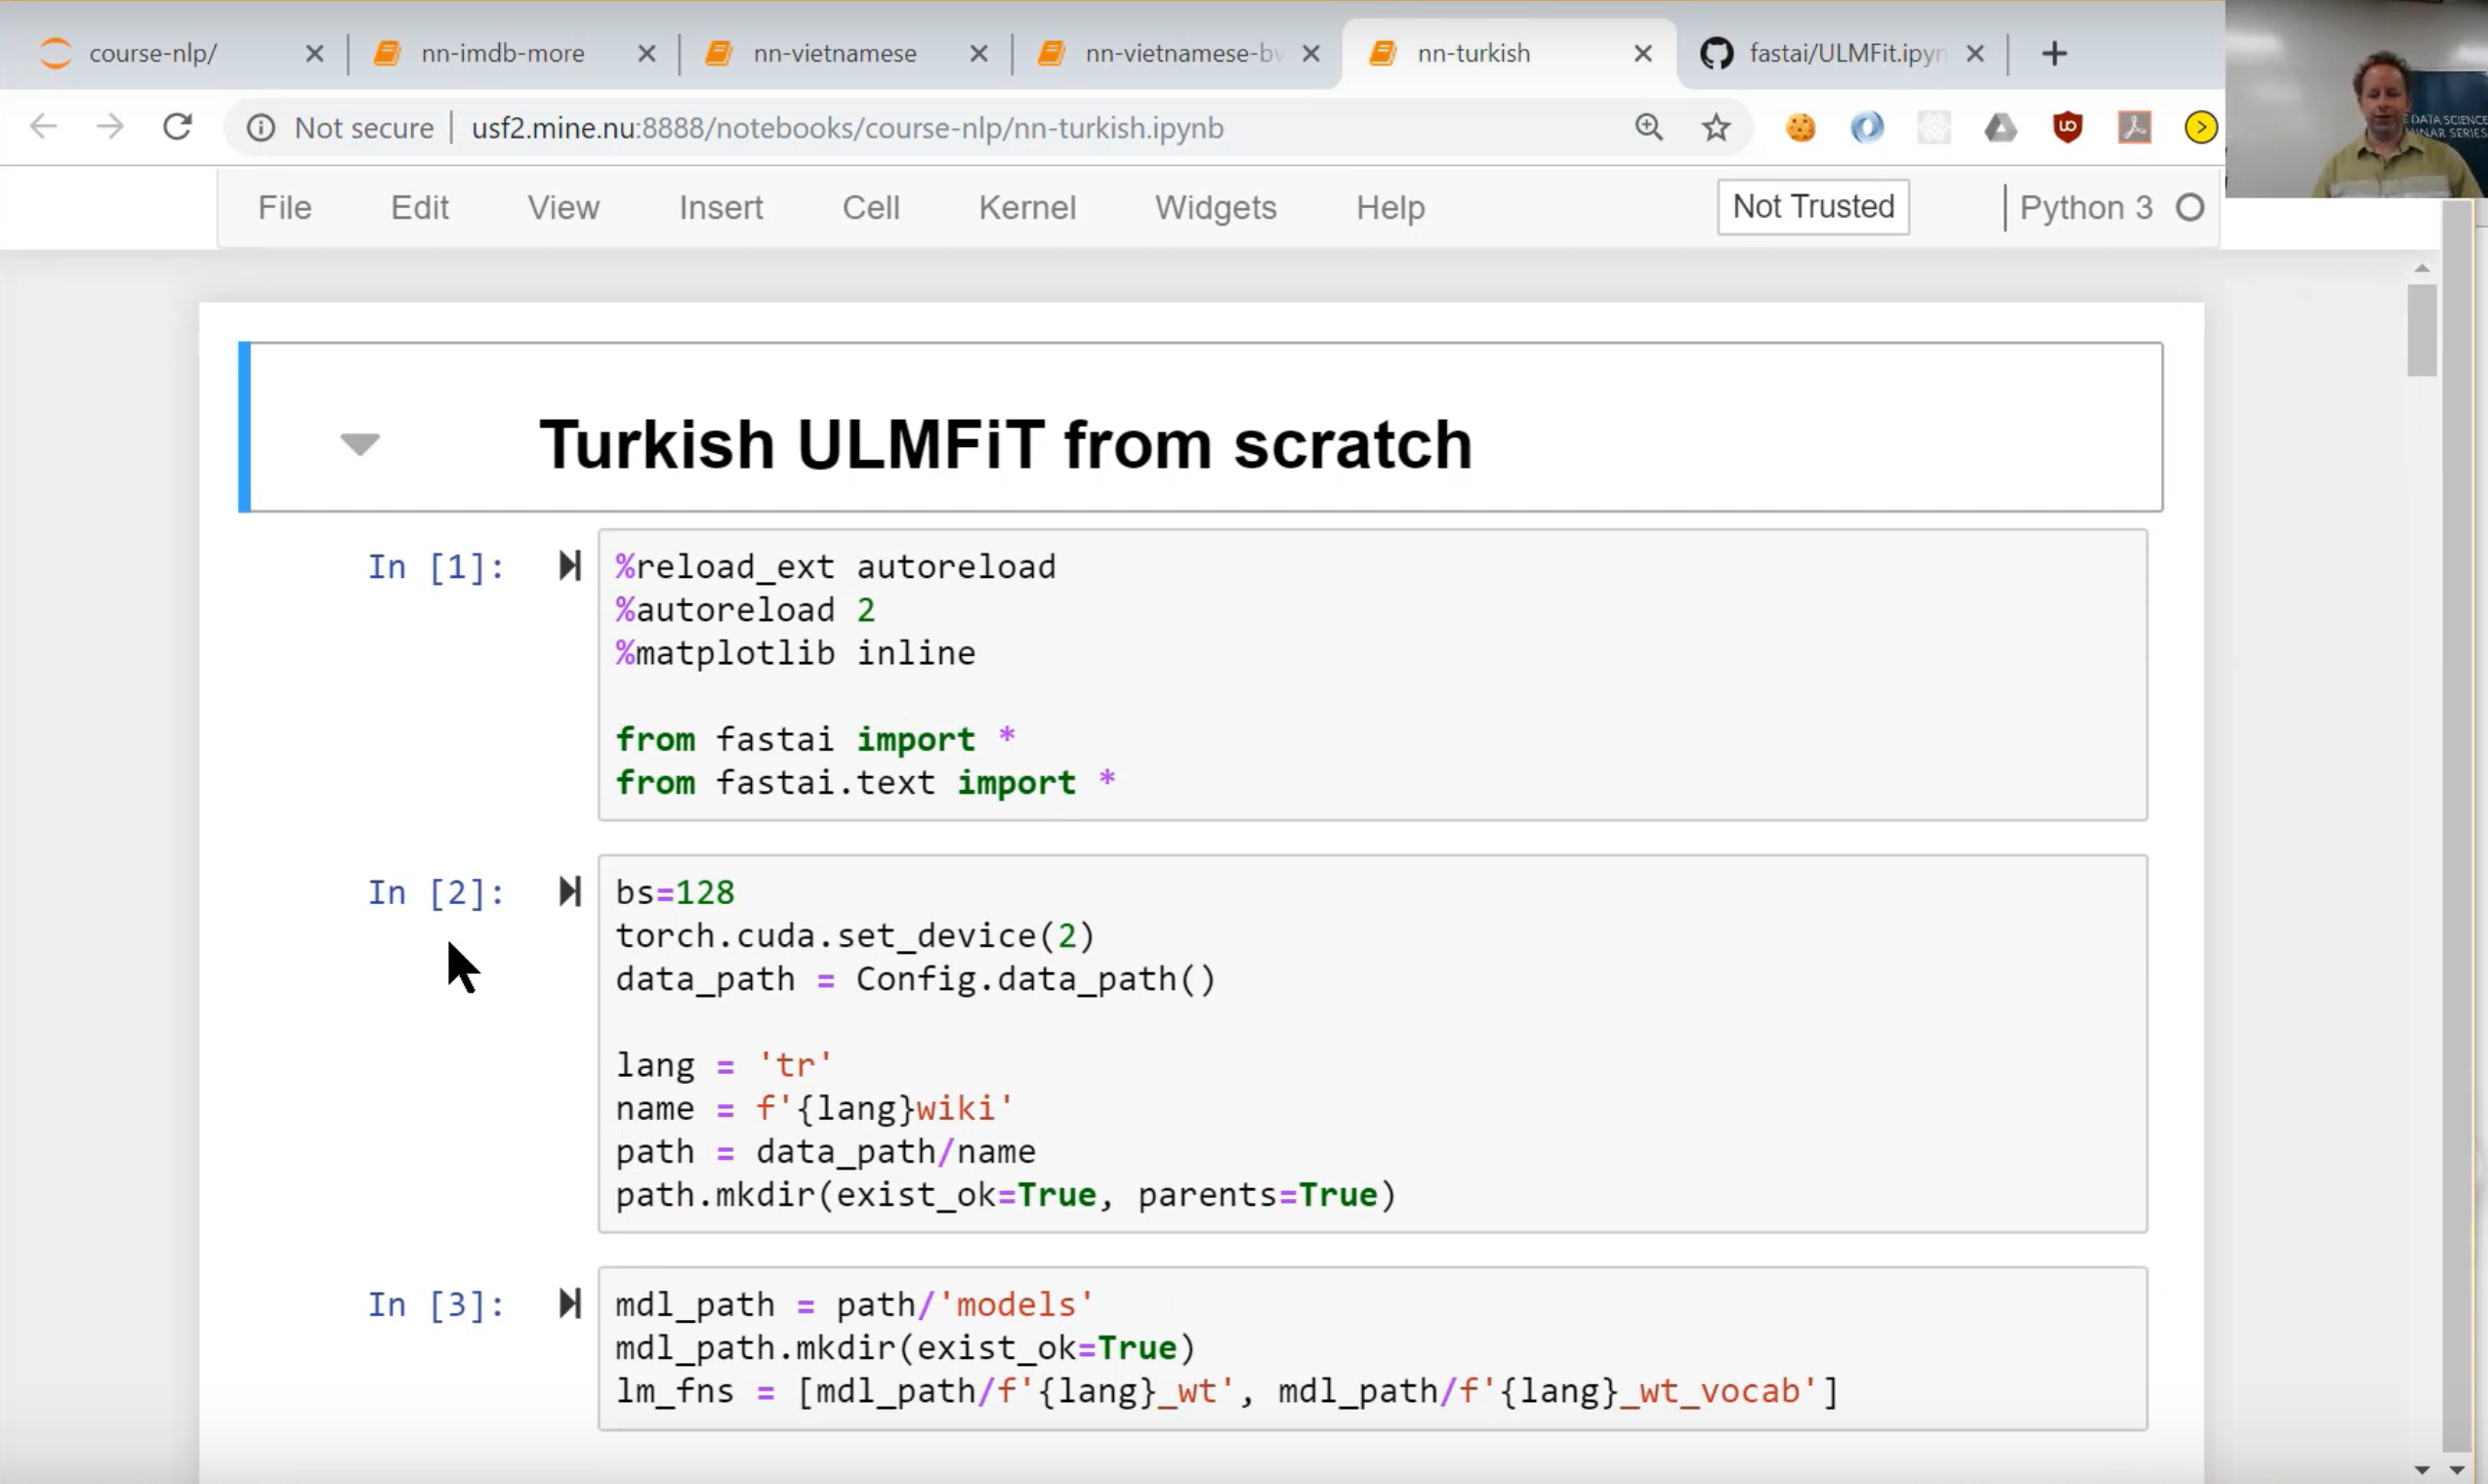 Jeremy shares ULMFit implementations in Vietnamese and Turkish